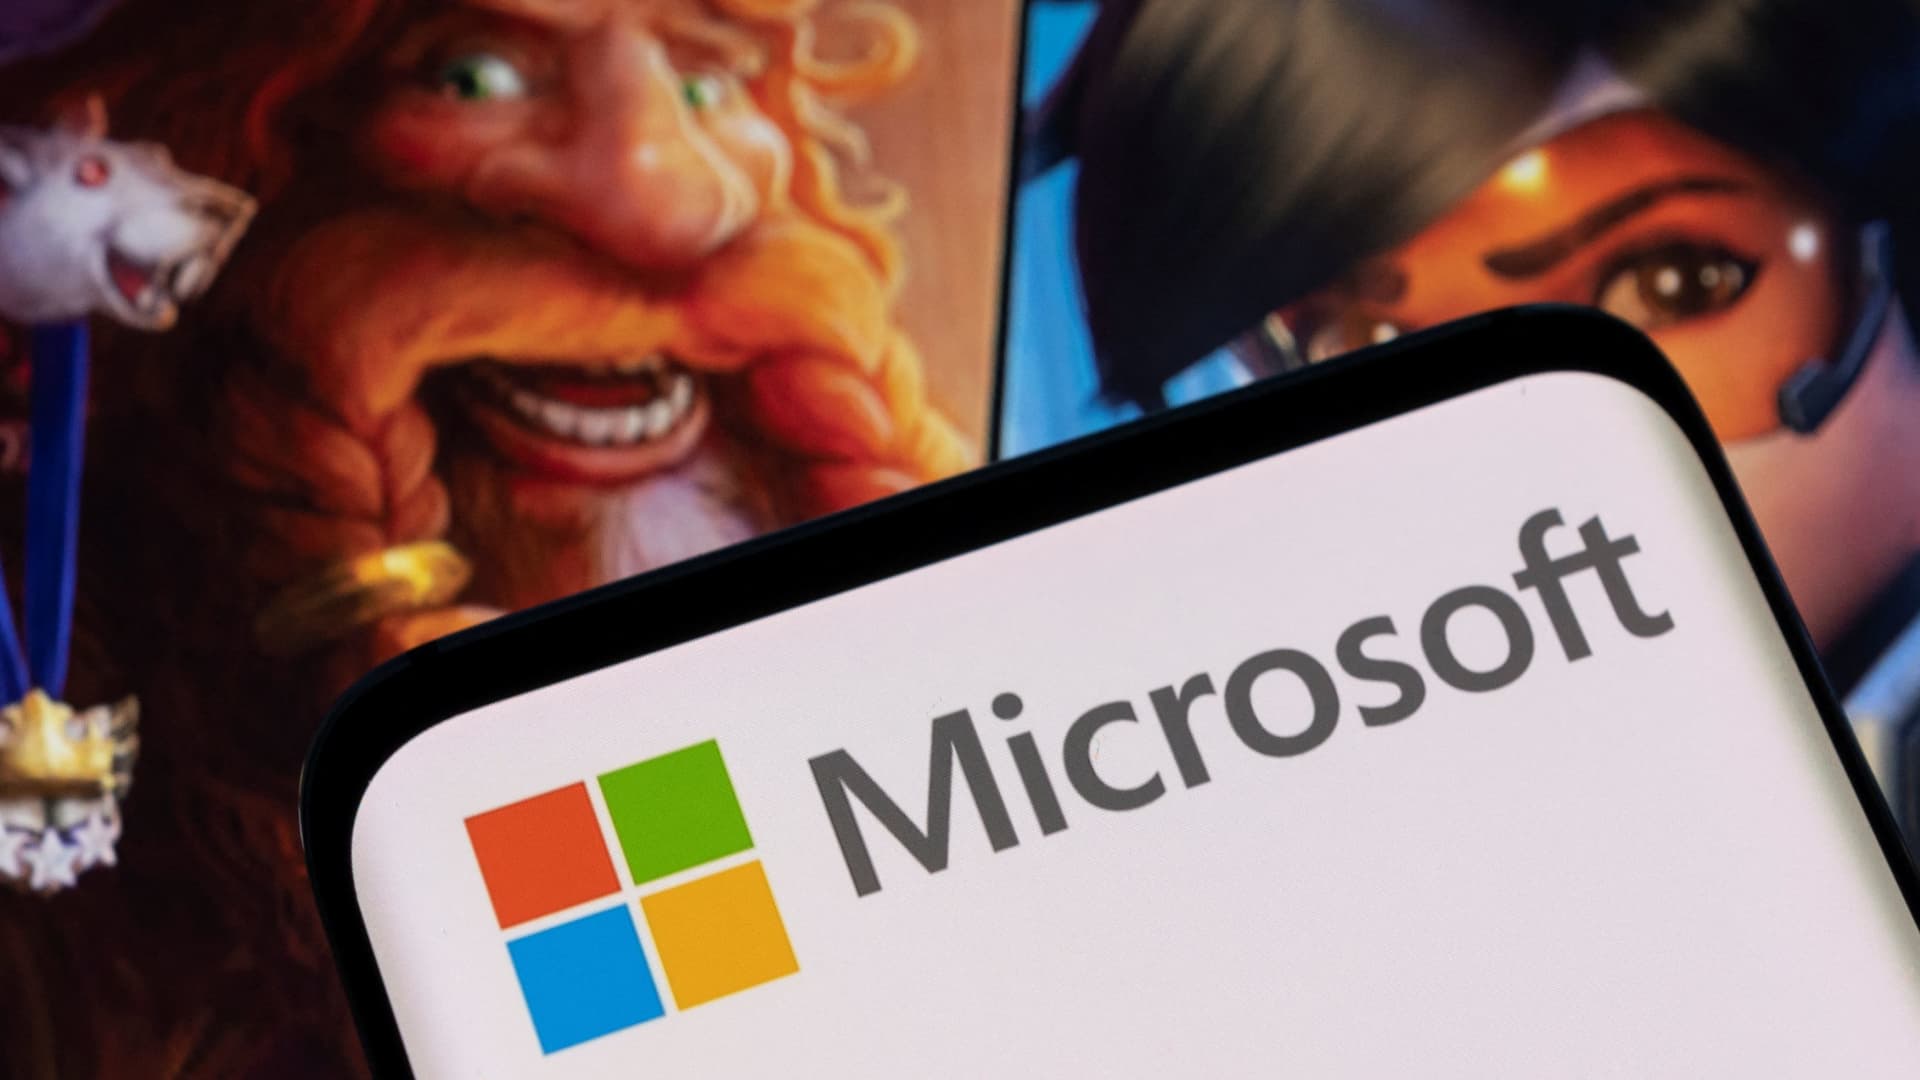 Microsoft submits new Activision Blizzard takeover deal to British regulator after initial block